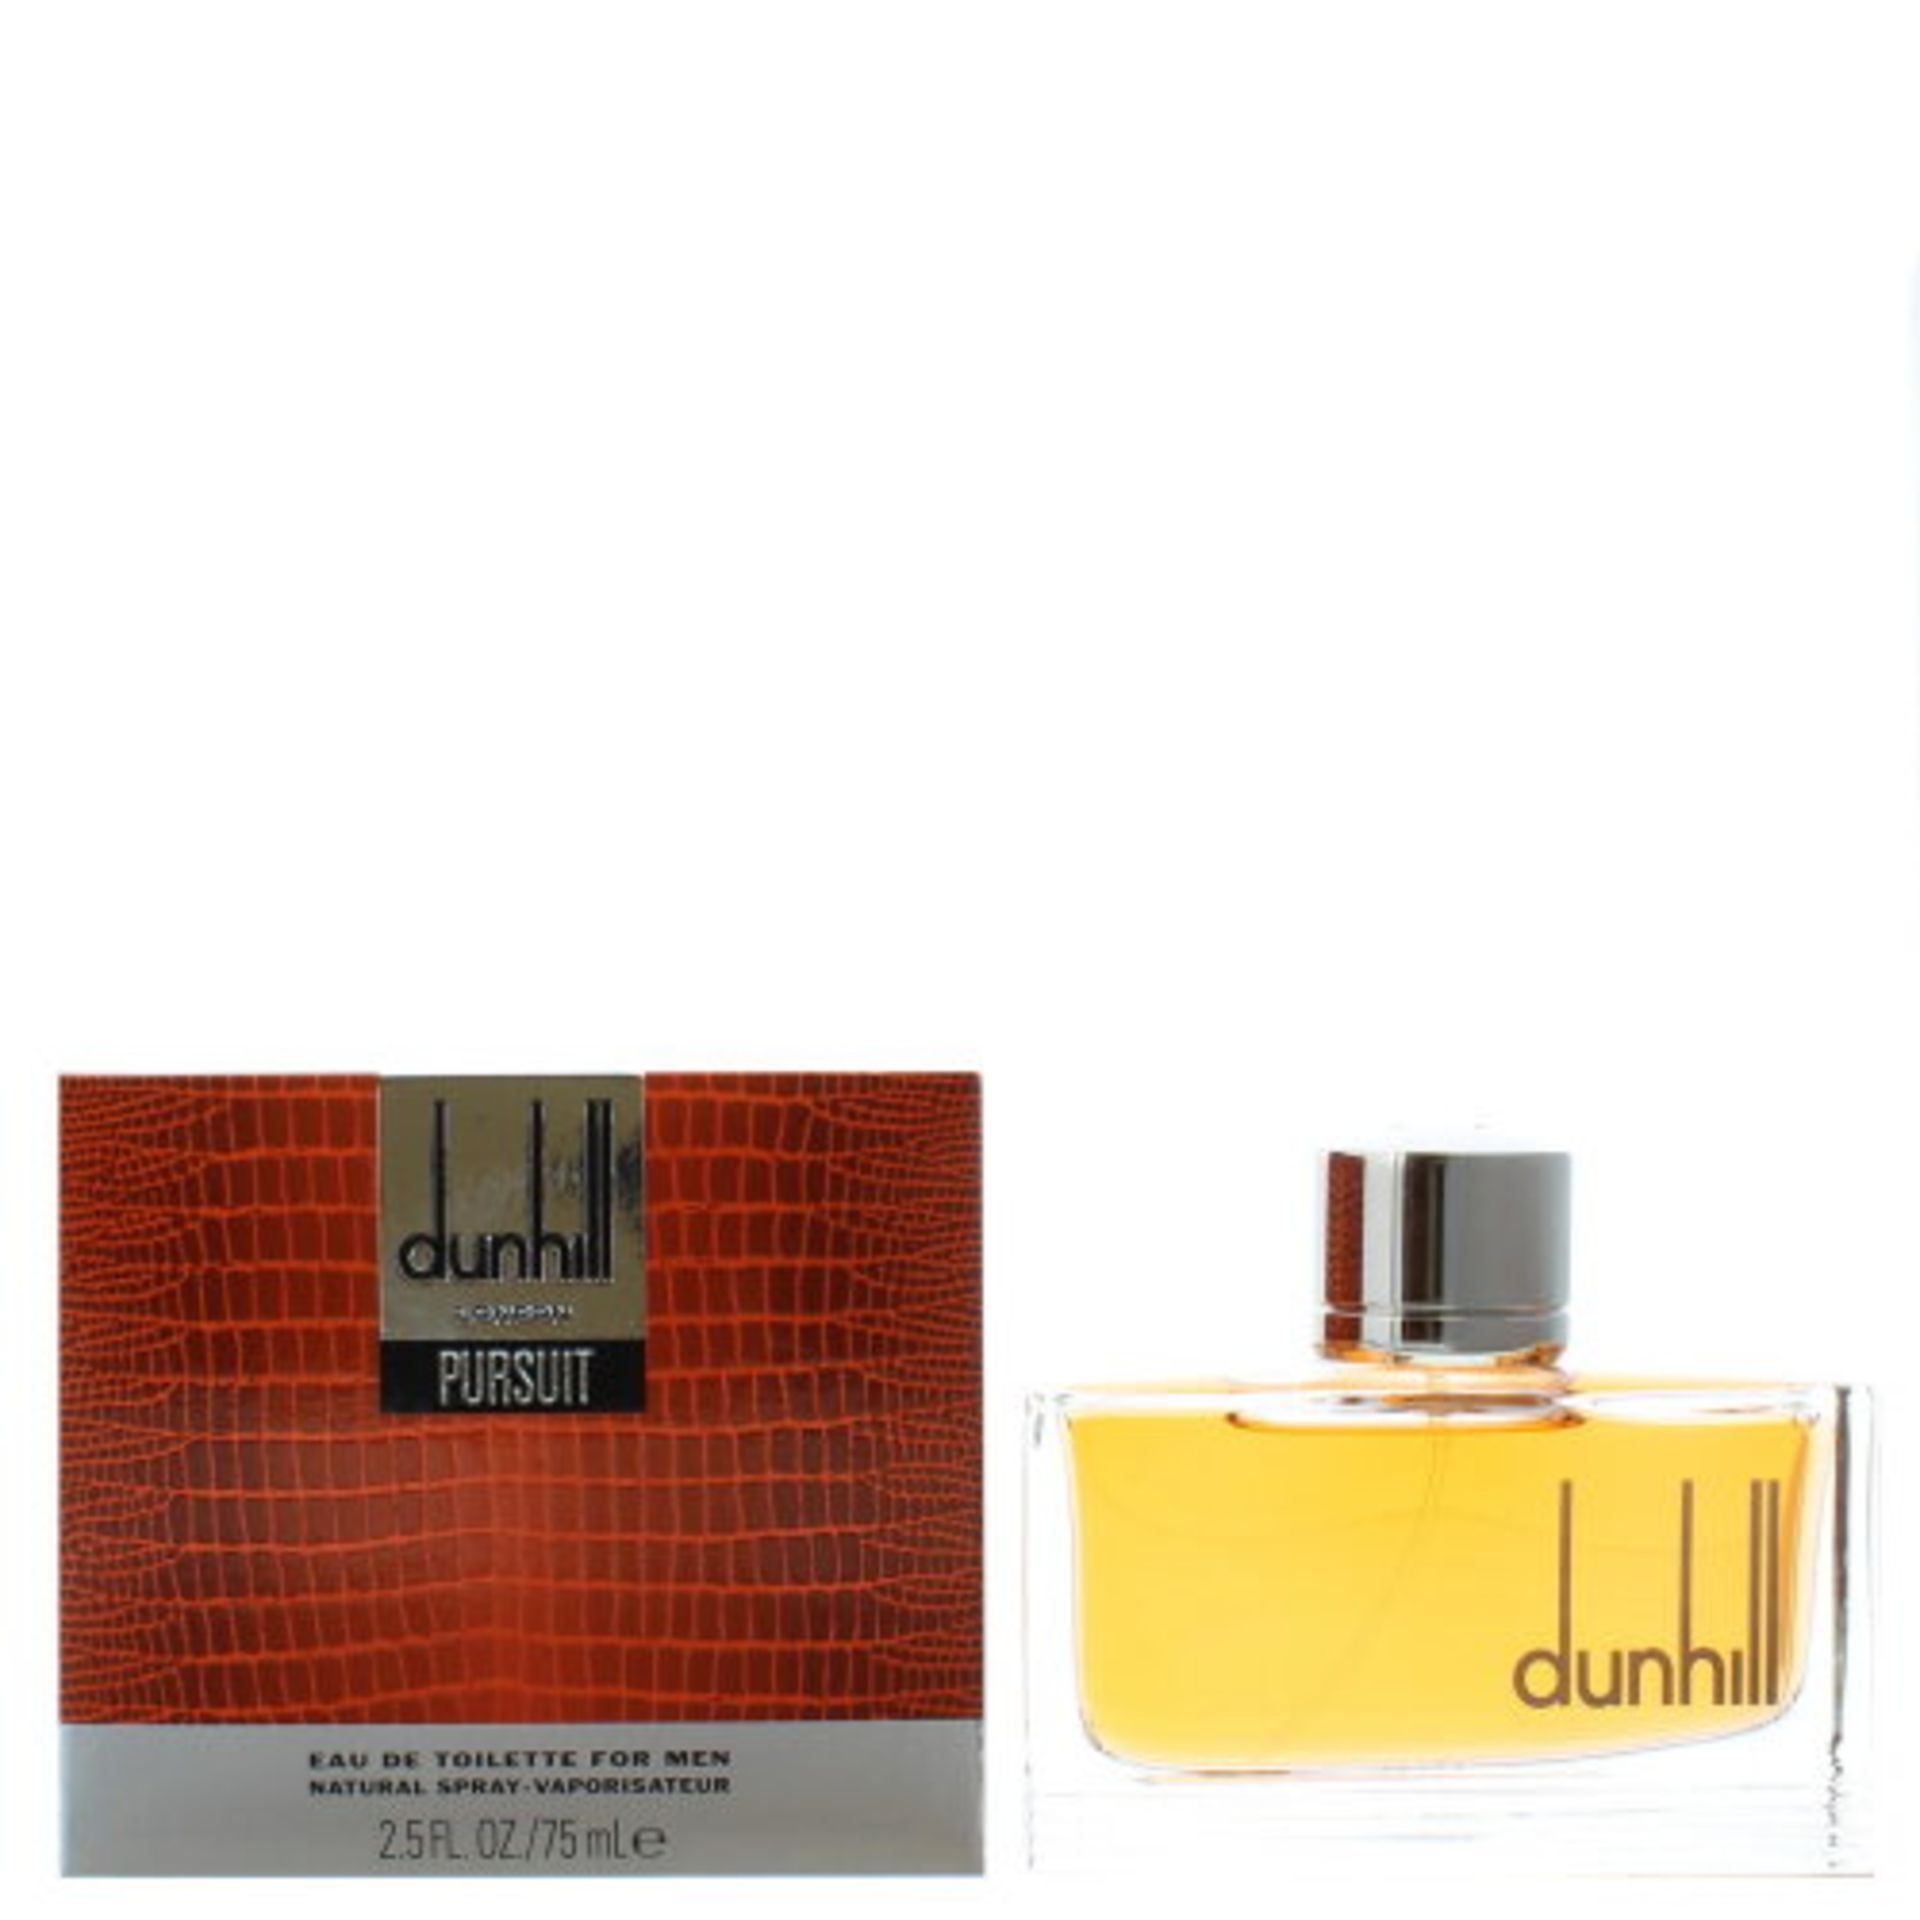 DUNHILL AFTERSHAVE - Image 3 of 3